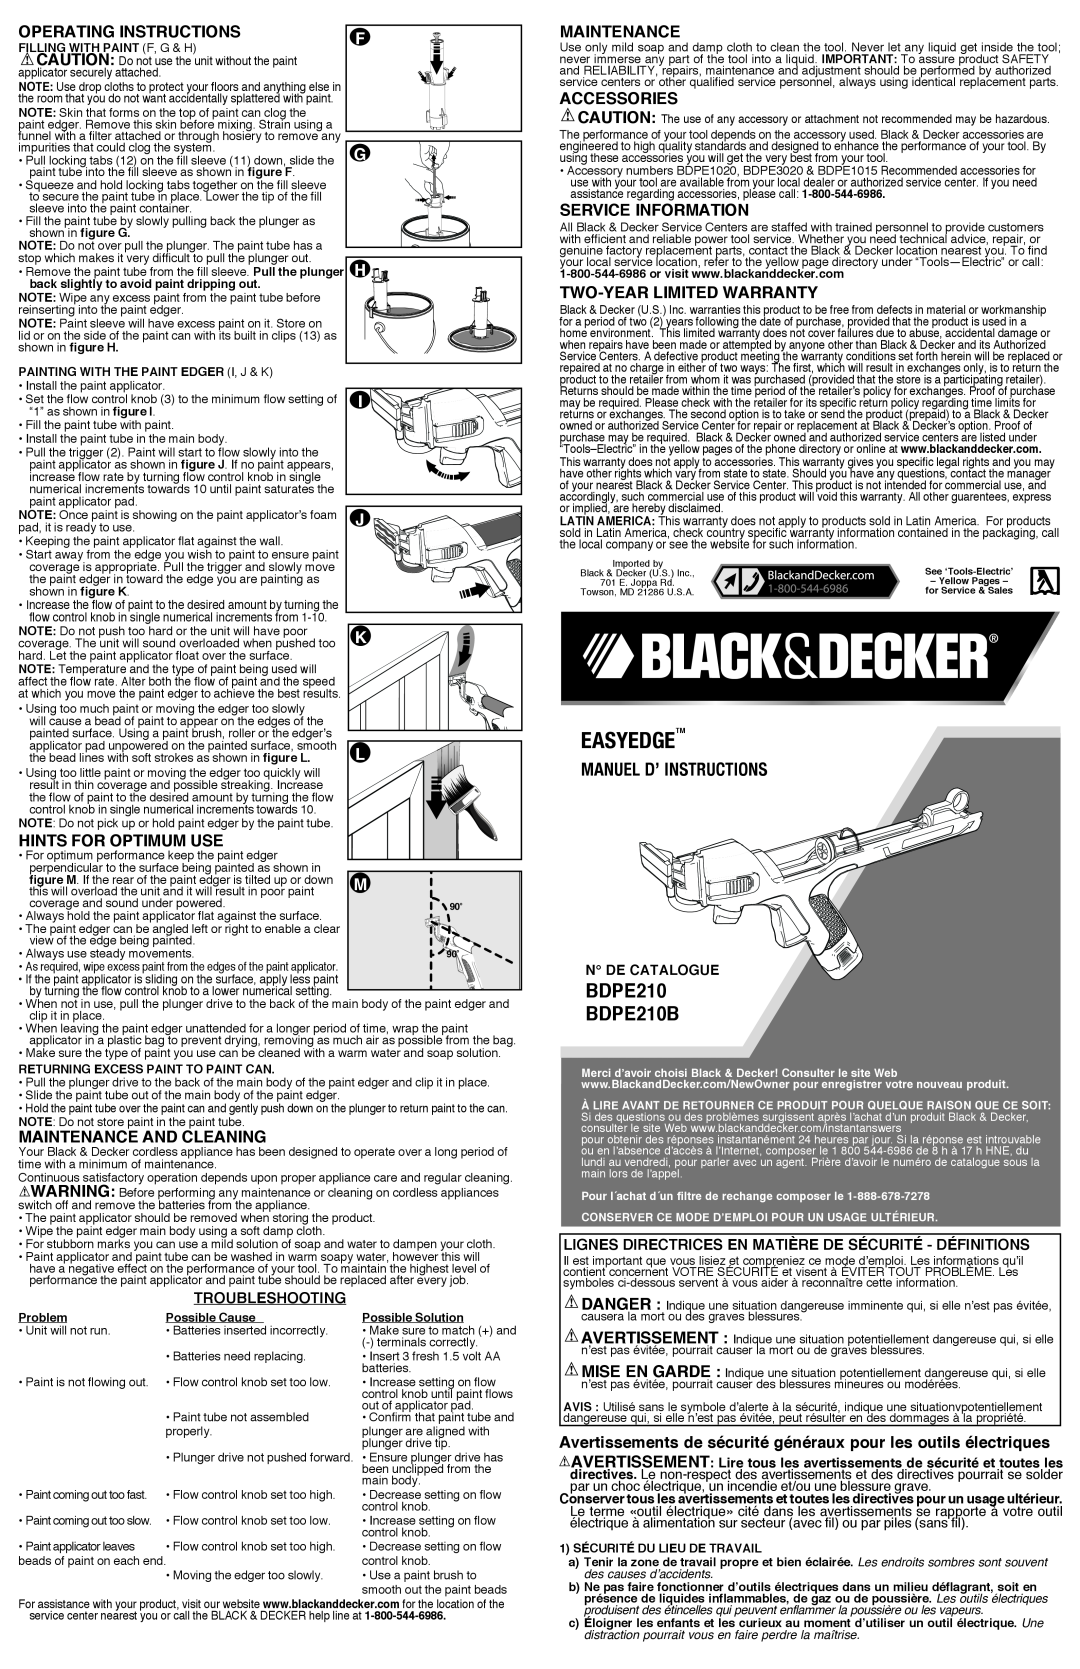 Black & Decker BDPE210 EasyEdgeTM, Operating Instructions, Hints for optimum use, Maintenance and cleaning, Accessories 